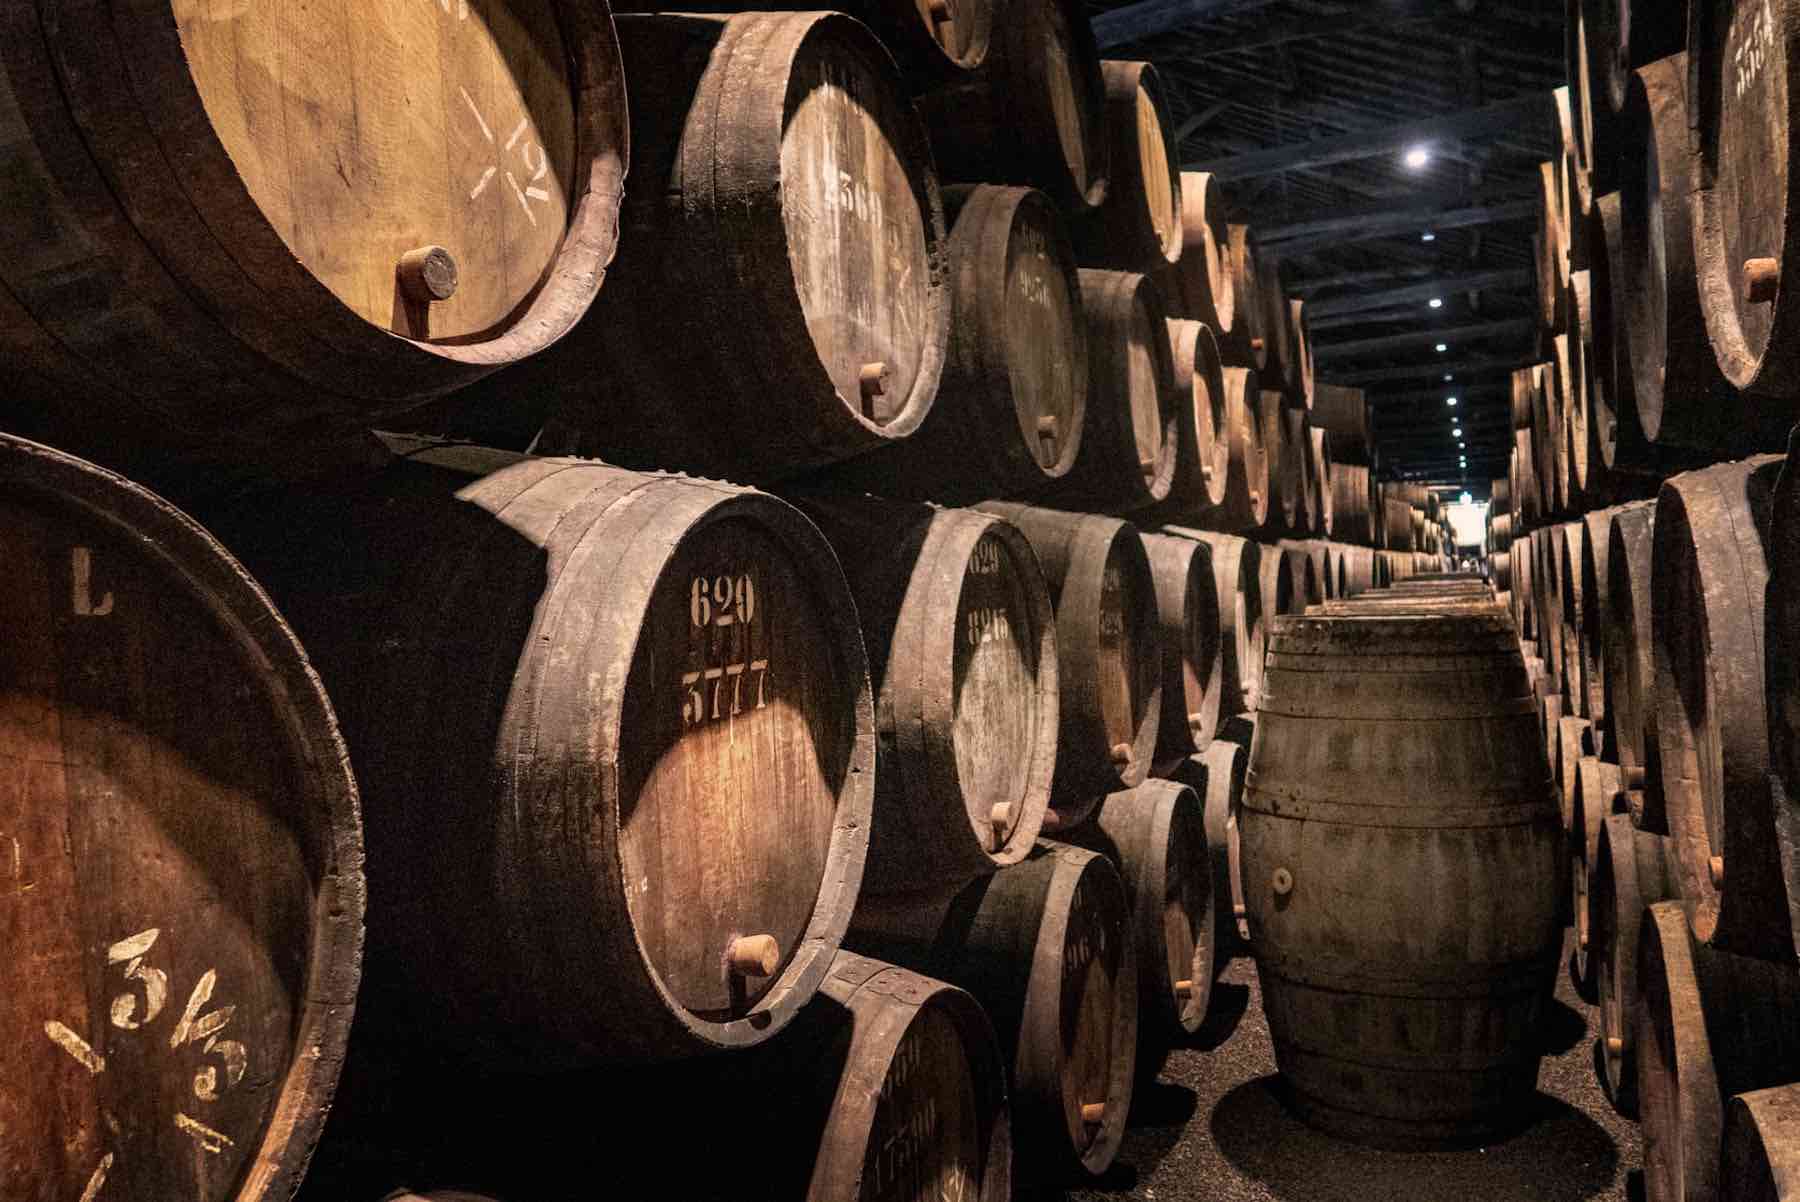 Buy and sell whisky casks